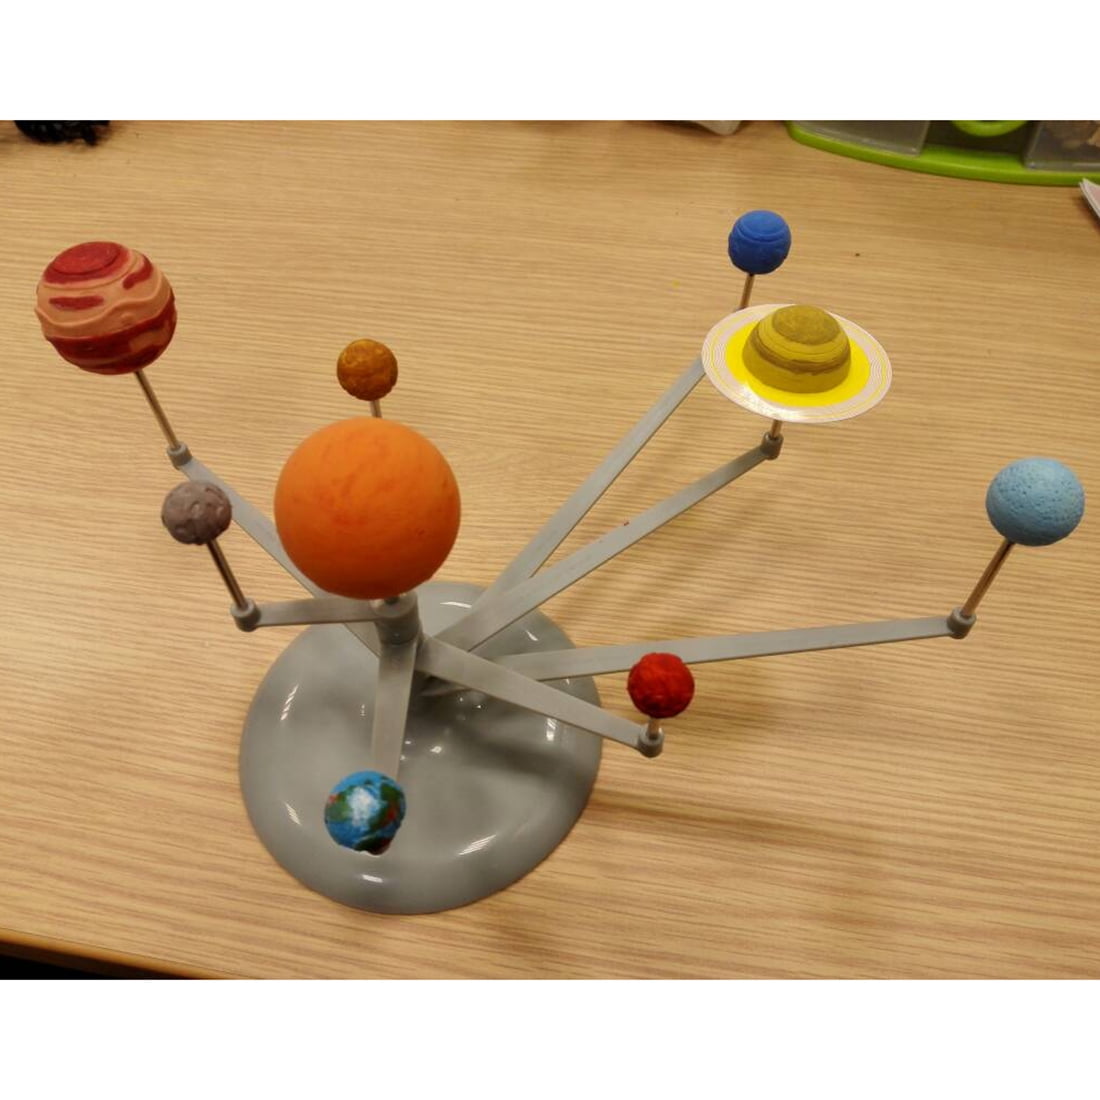 Craft / Making A Solar System – Clara and Macy